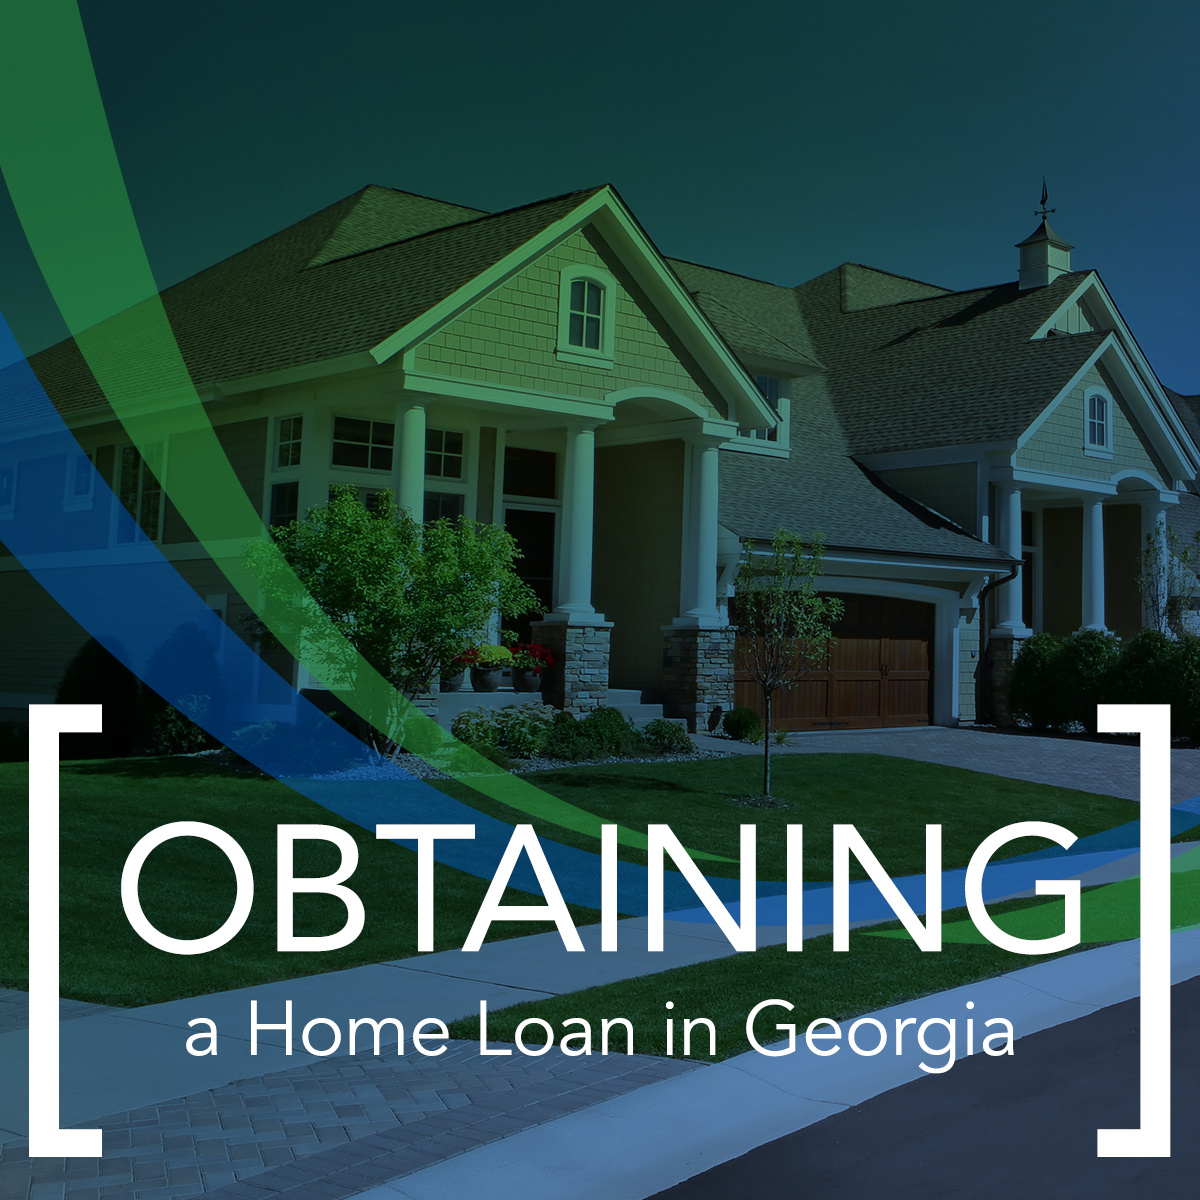 Steps to Take Before Obtaining a Home Loan in Georgia